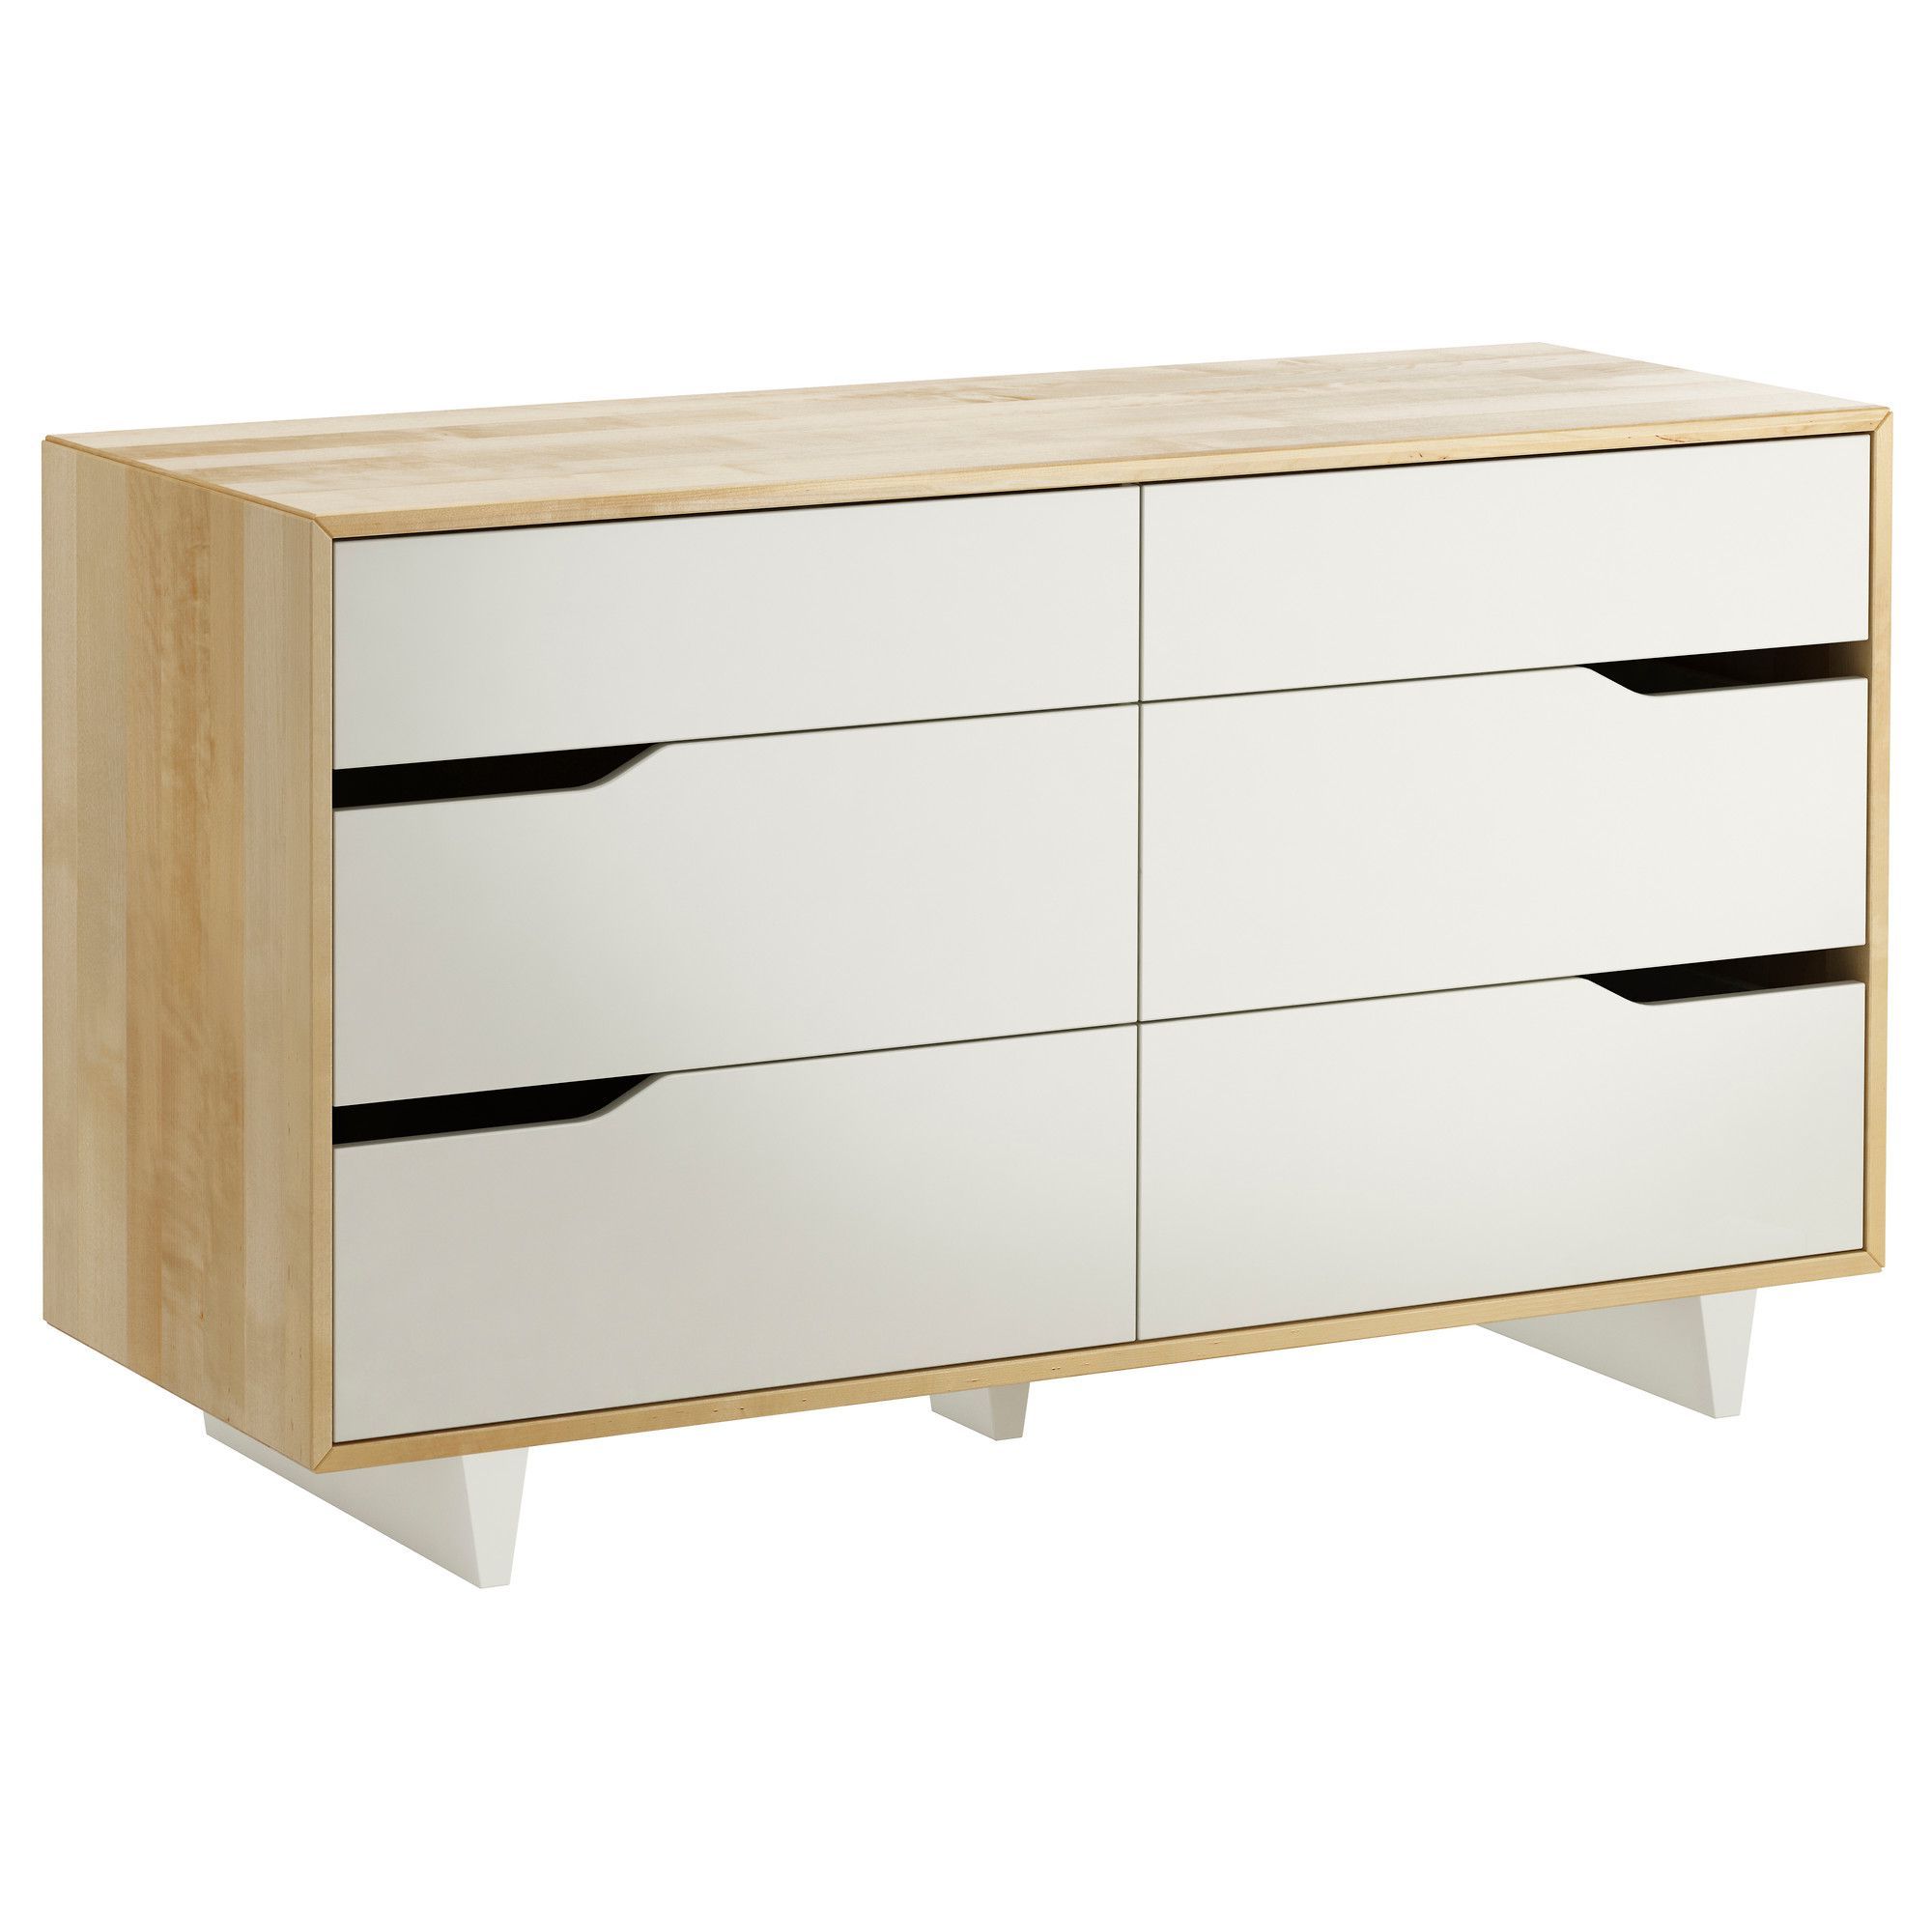 Well Liked Dowler 2 Drawer Sideboards Within Buy Furniture Singapore Online L Furniture & Home Ideas (View 18 of 20)